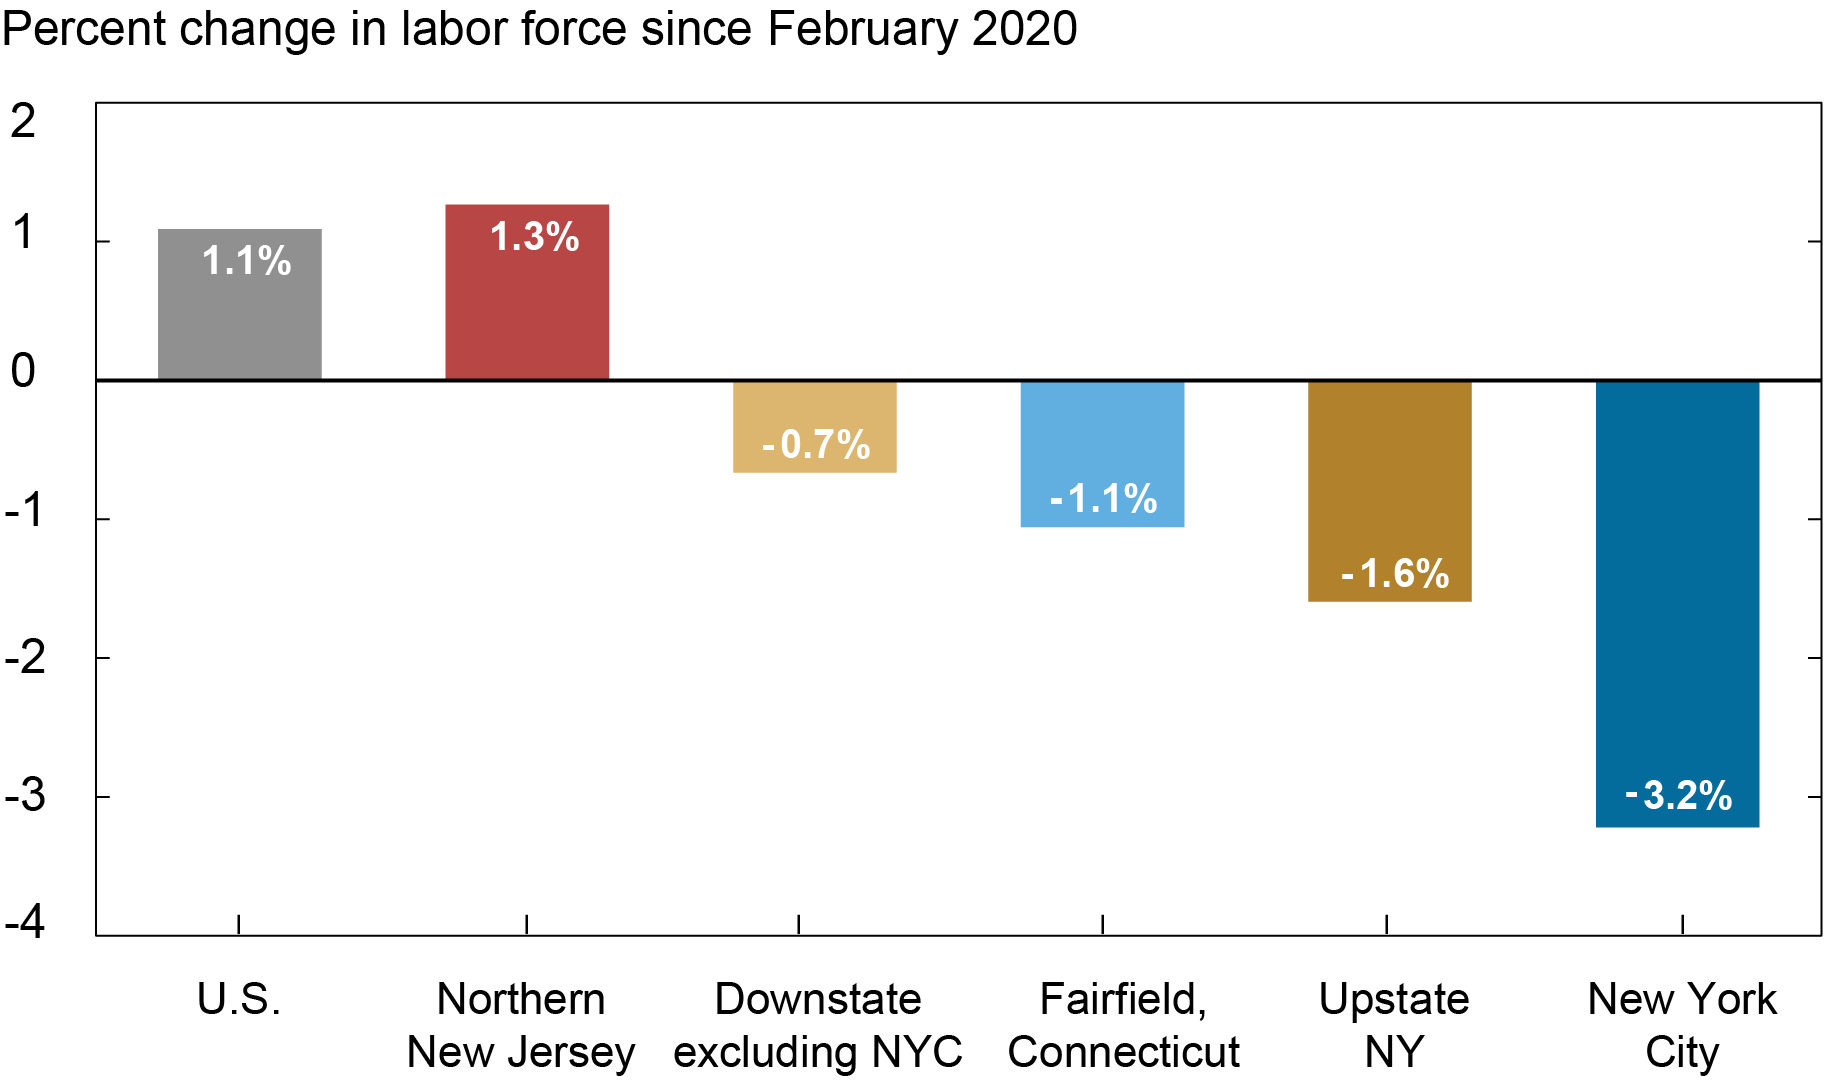 Liberty Street Economics bar chart showing availability of workers in the U.S. and the tri-state region between February 2020 and 2023. While the labor force has risen above pre-pandemic levels in the U.S. and Northern New Jersey, it remains 3.2 percent below pre-pandemic levels in New York City, just over 2 percent below in upstate New York, and 1.2 percent below in Fairfield.  